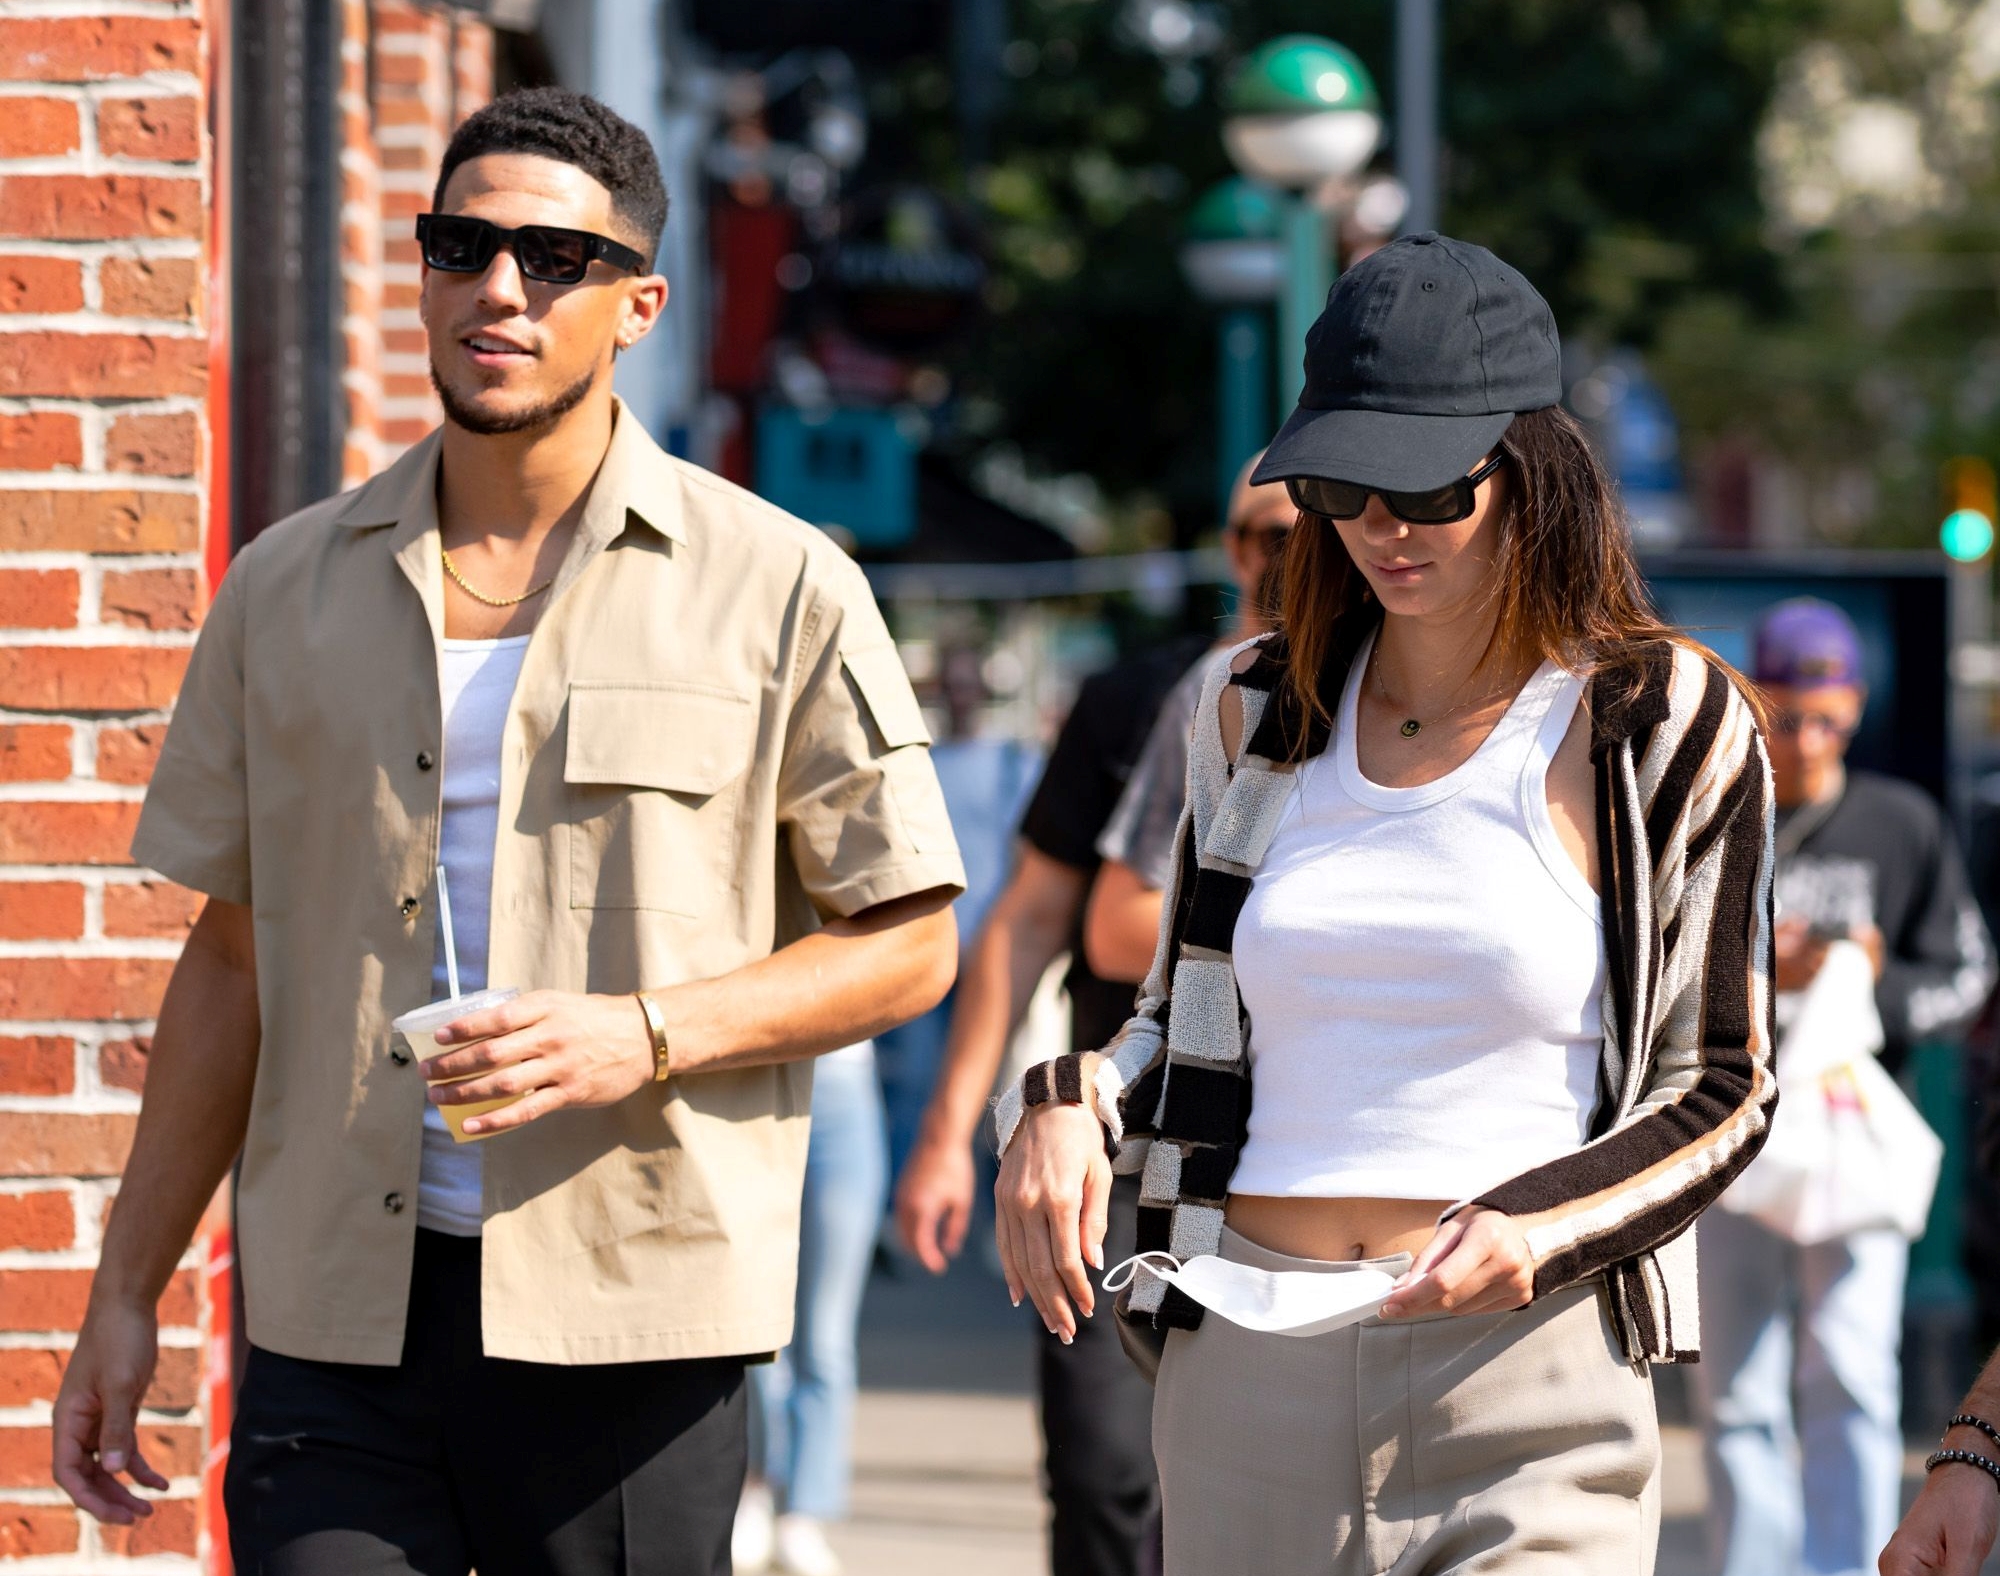 Kendall Jenner and Devin Booker photographed strolling around SoHo